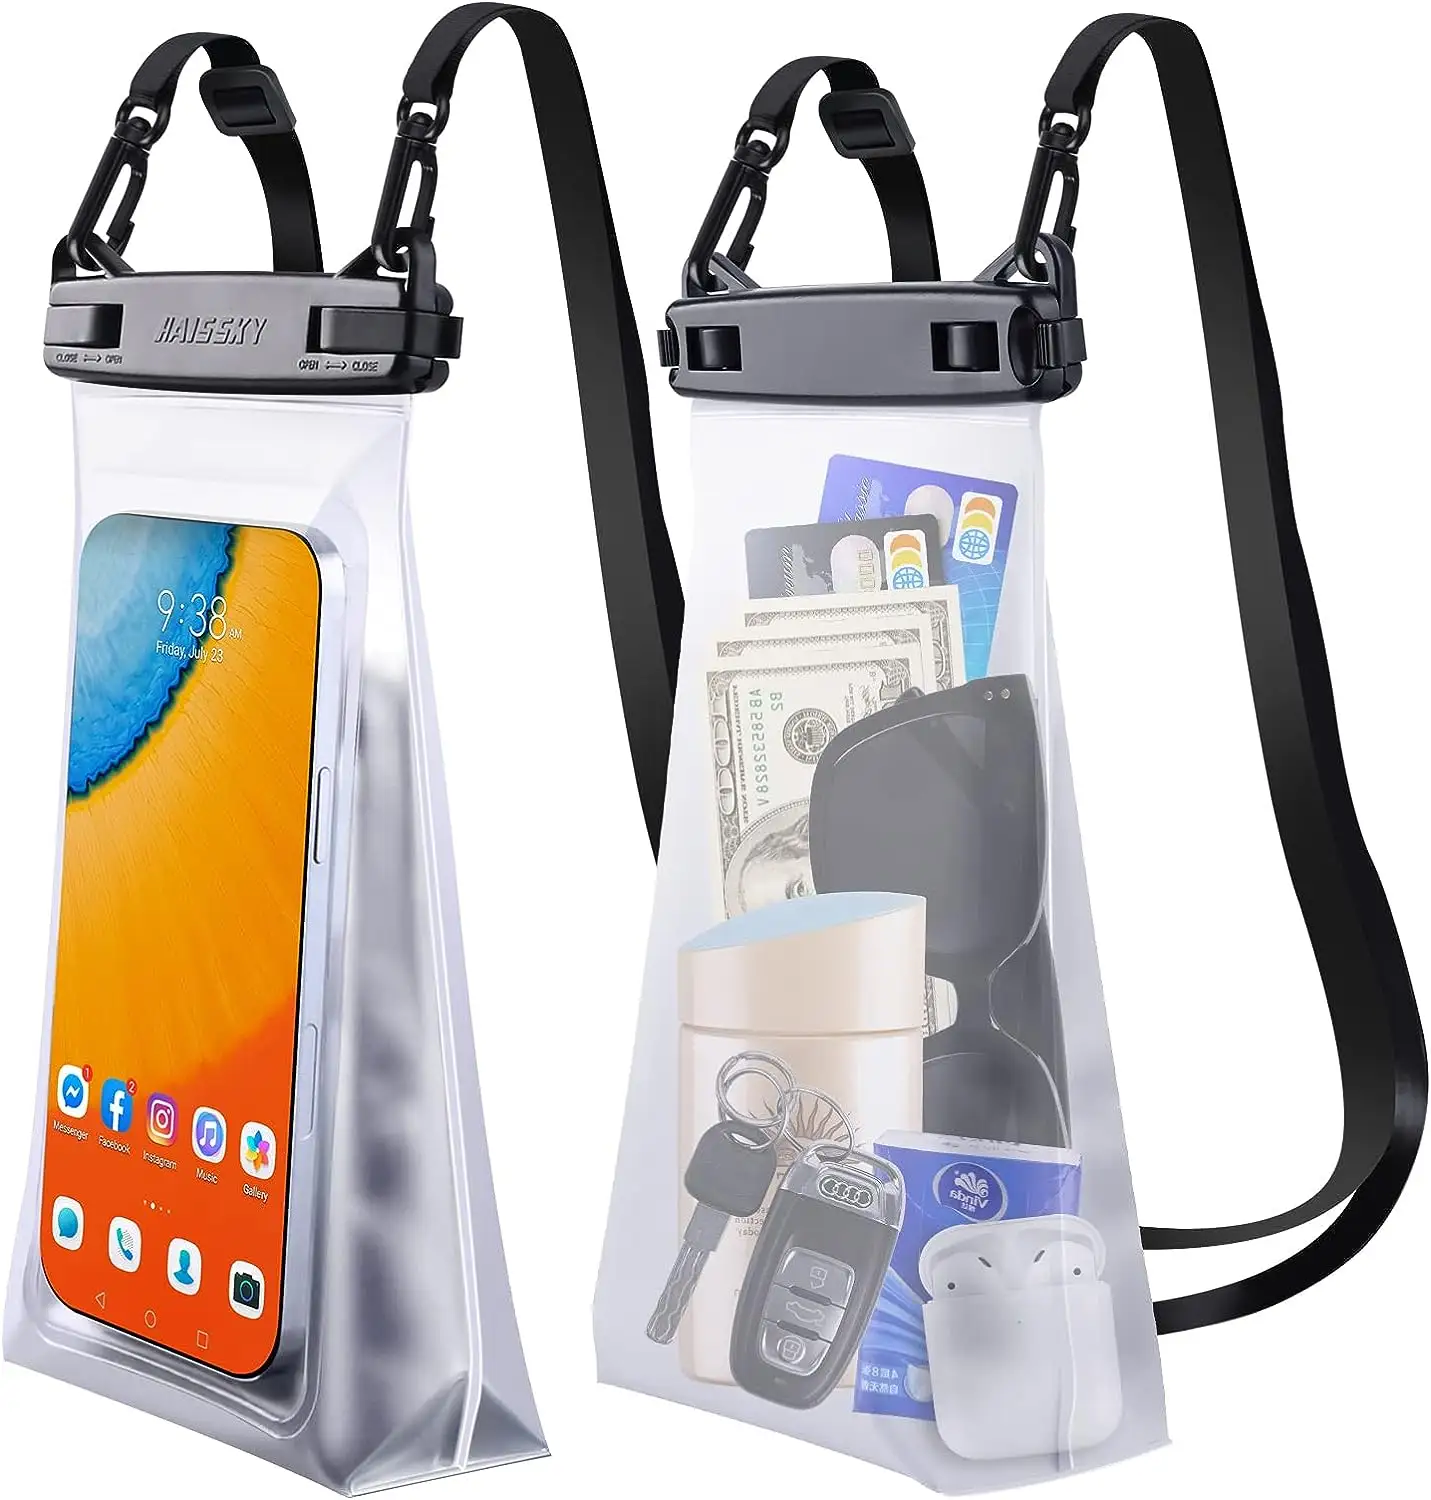 Hot sale transparent pvc waterproof phone pouch with adjustable belt for beach swimming